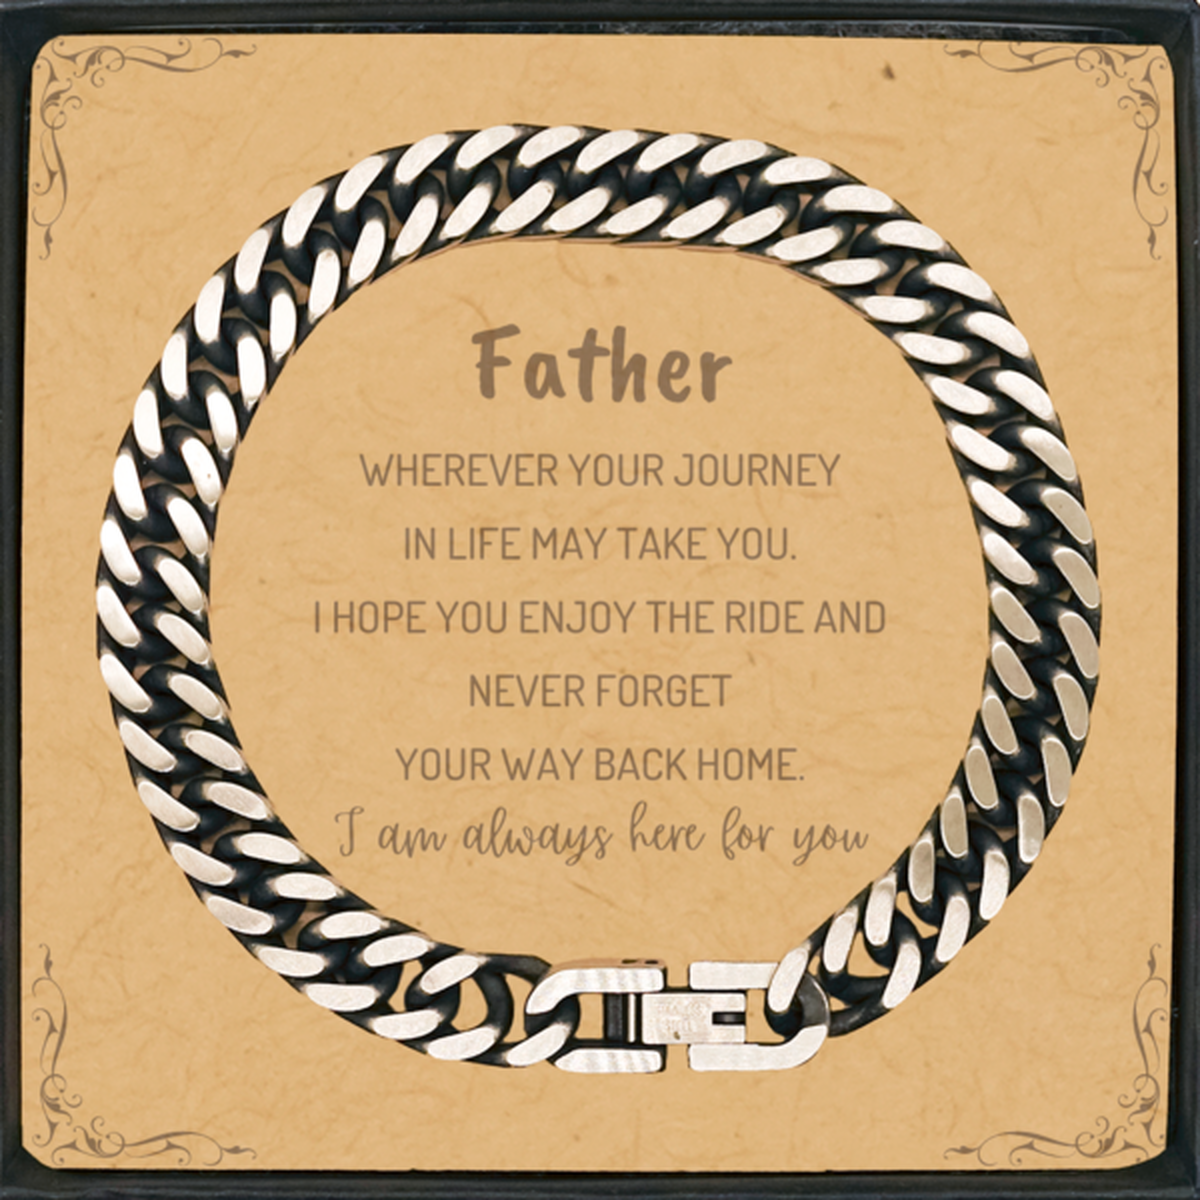 Father wherever your journey in life may take you, I am always here for you Father Cuban Link Chain Bracelet, Awesome Christmas Gifts For Father Message Card, Father Birthday Gifts for Men Women Family Loved One